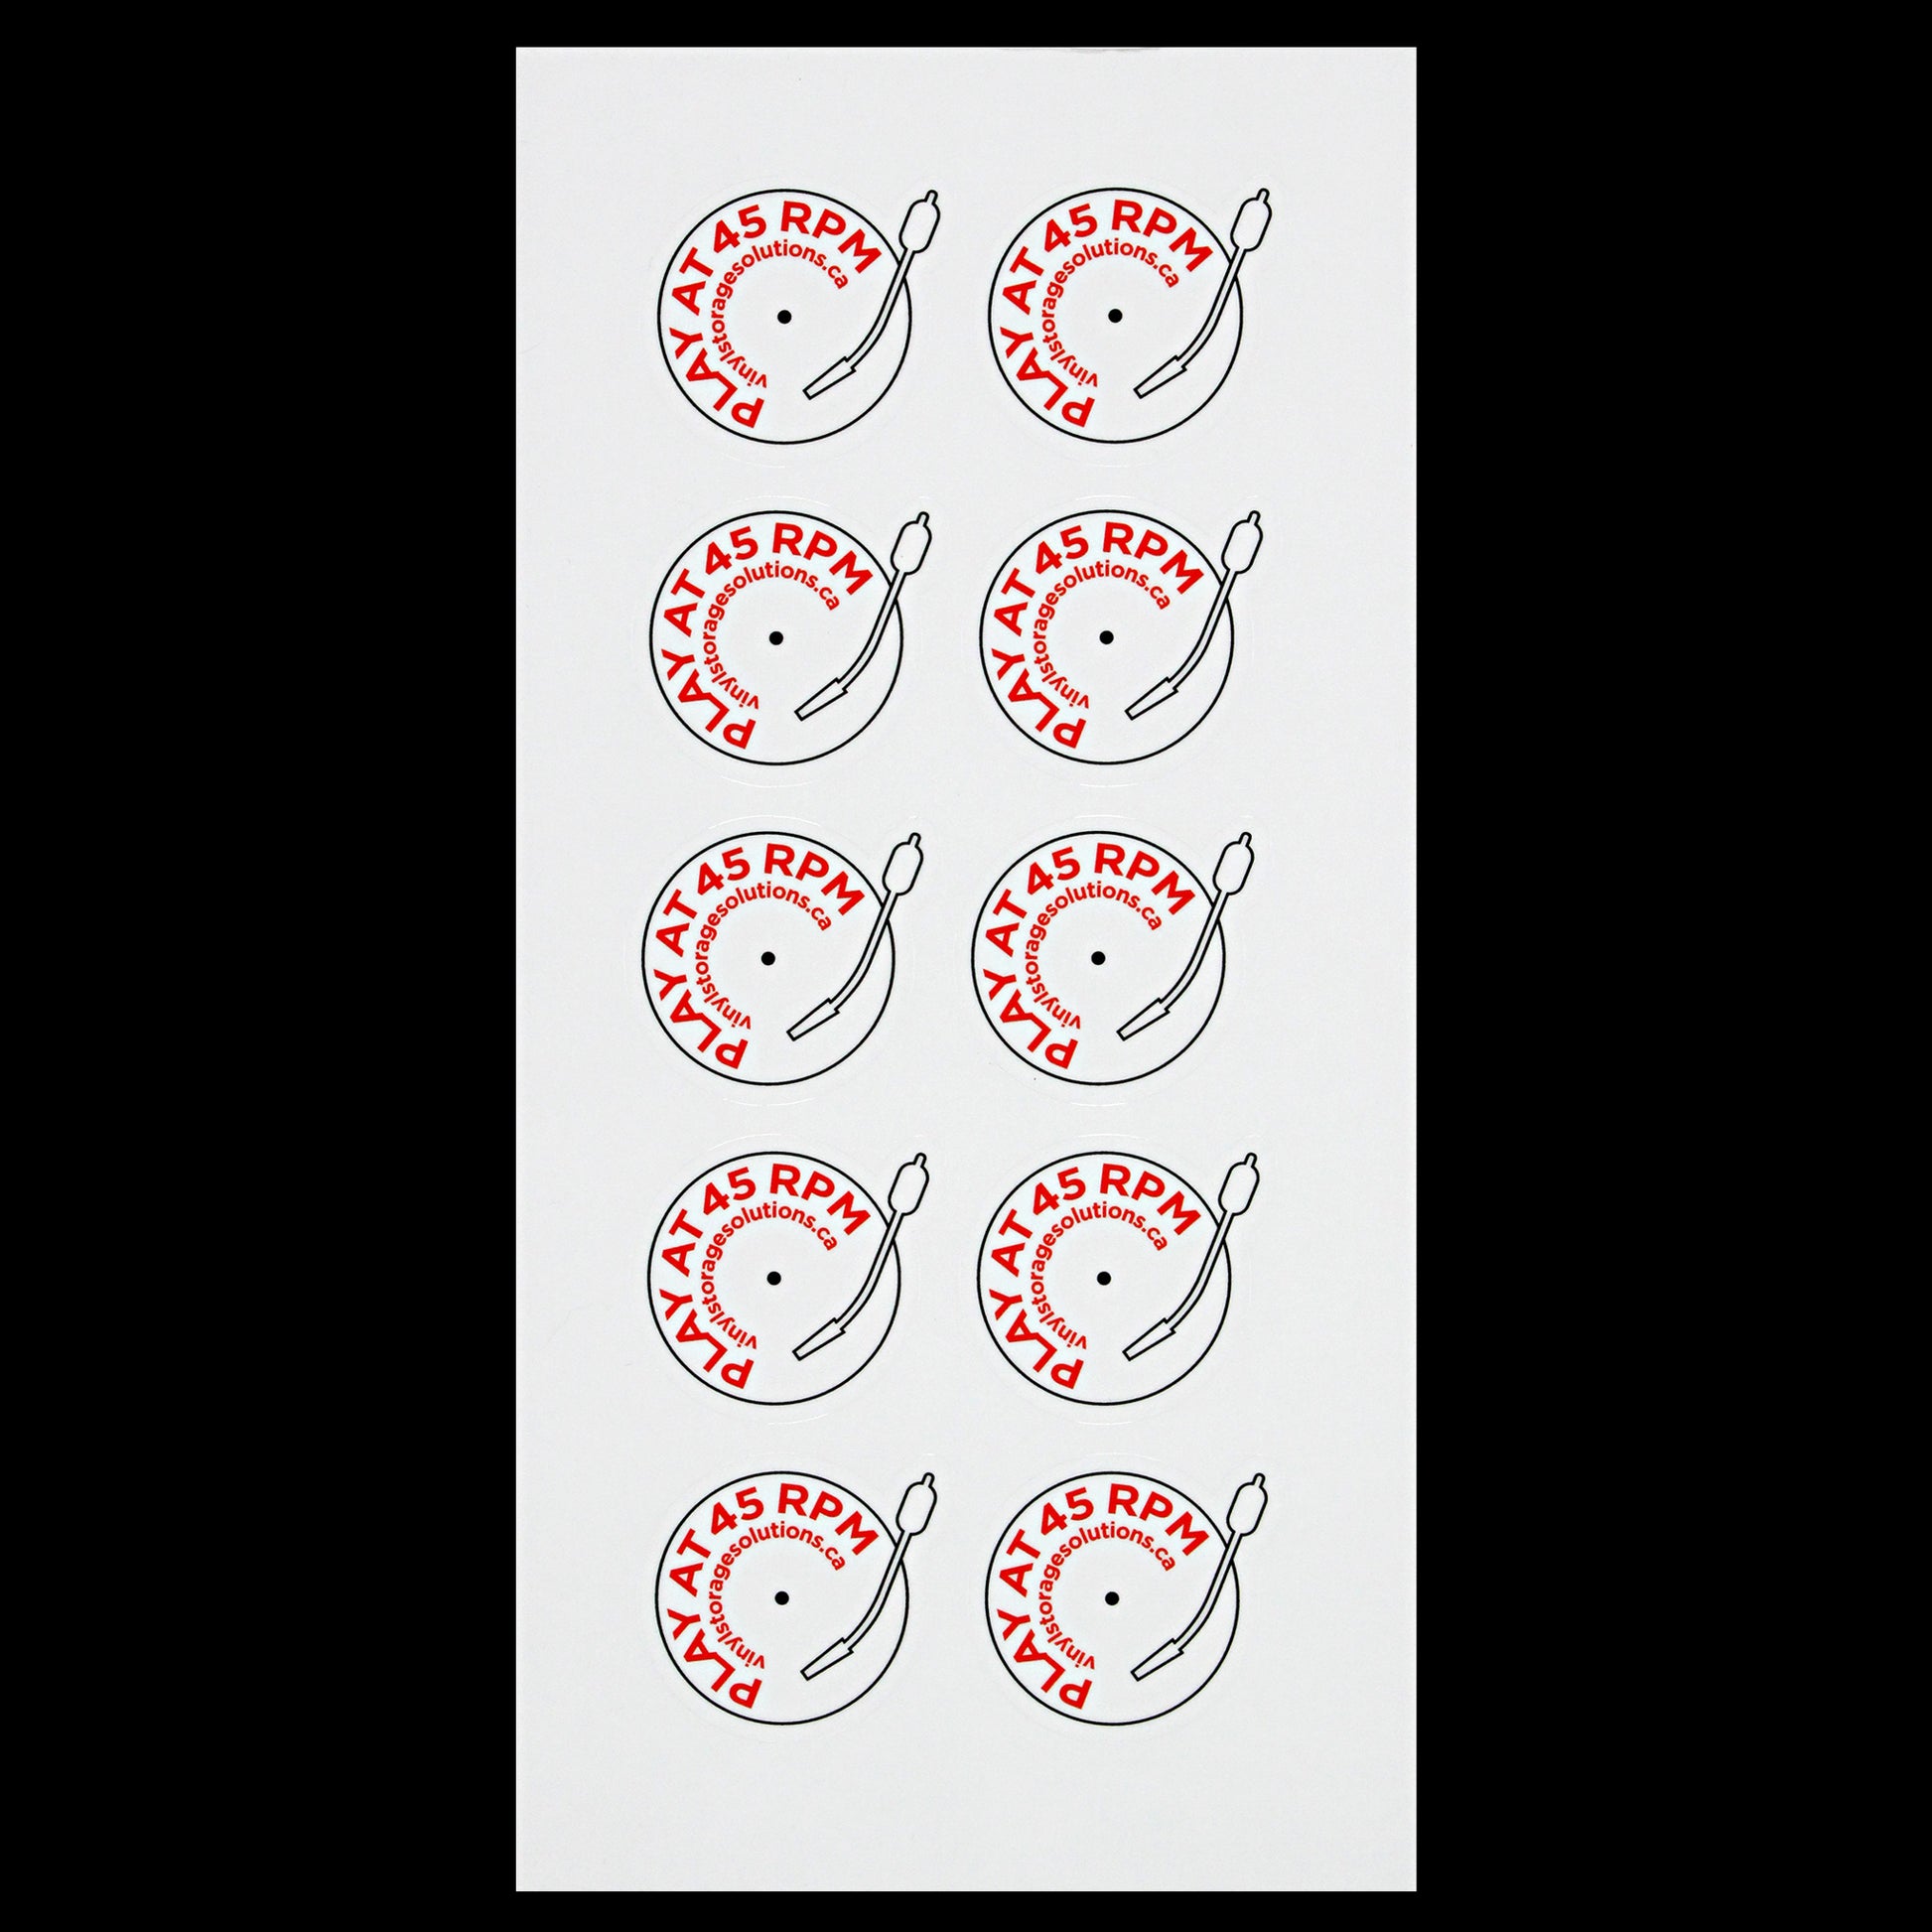 PLAY AT 45 RPM Stickers - Sheet of 10 - Vinyl Storage Solutions